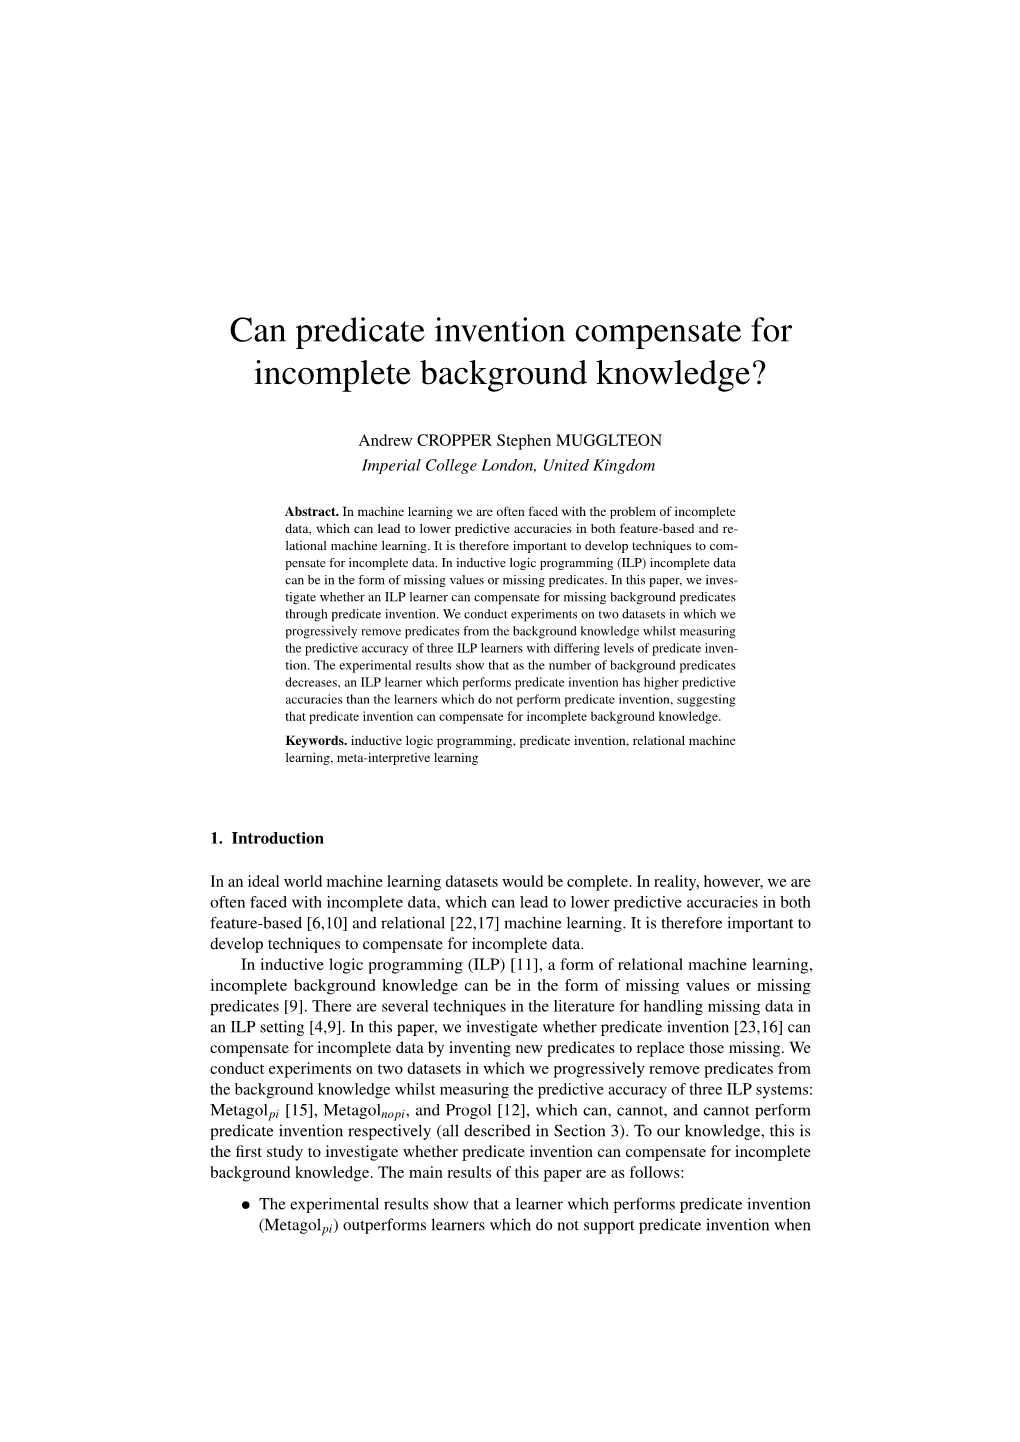 Can Predicate Invention Compensate for Incomplete Background Knowledge?